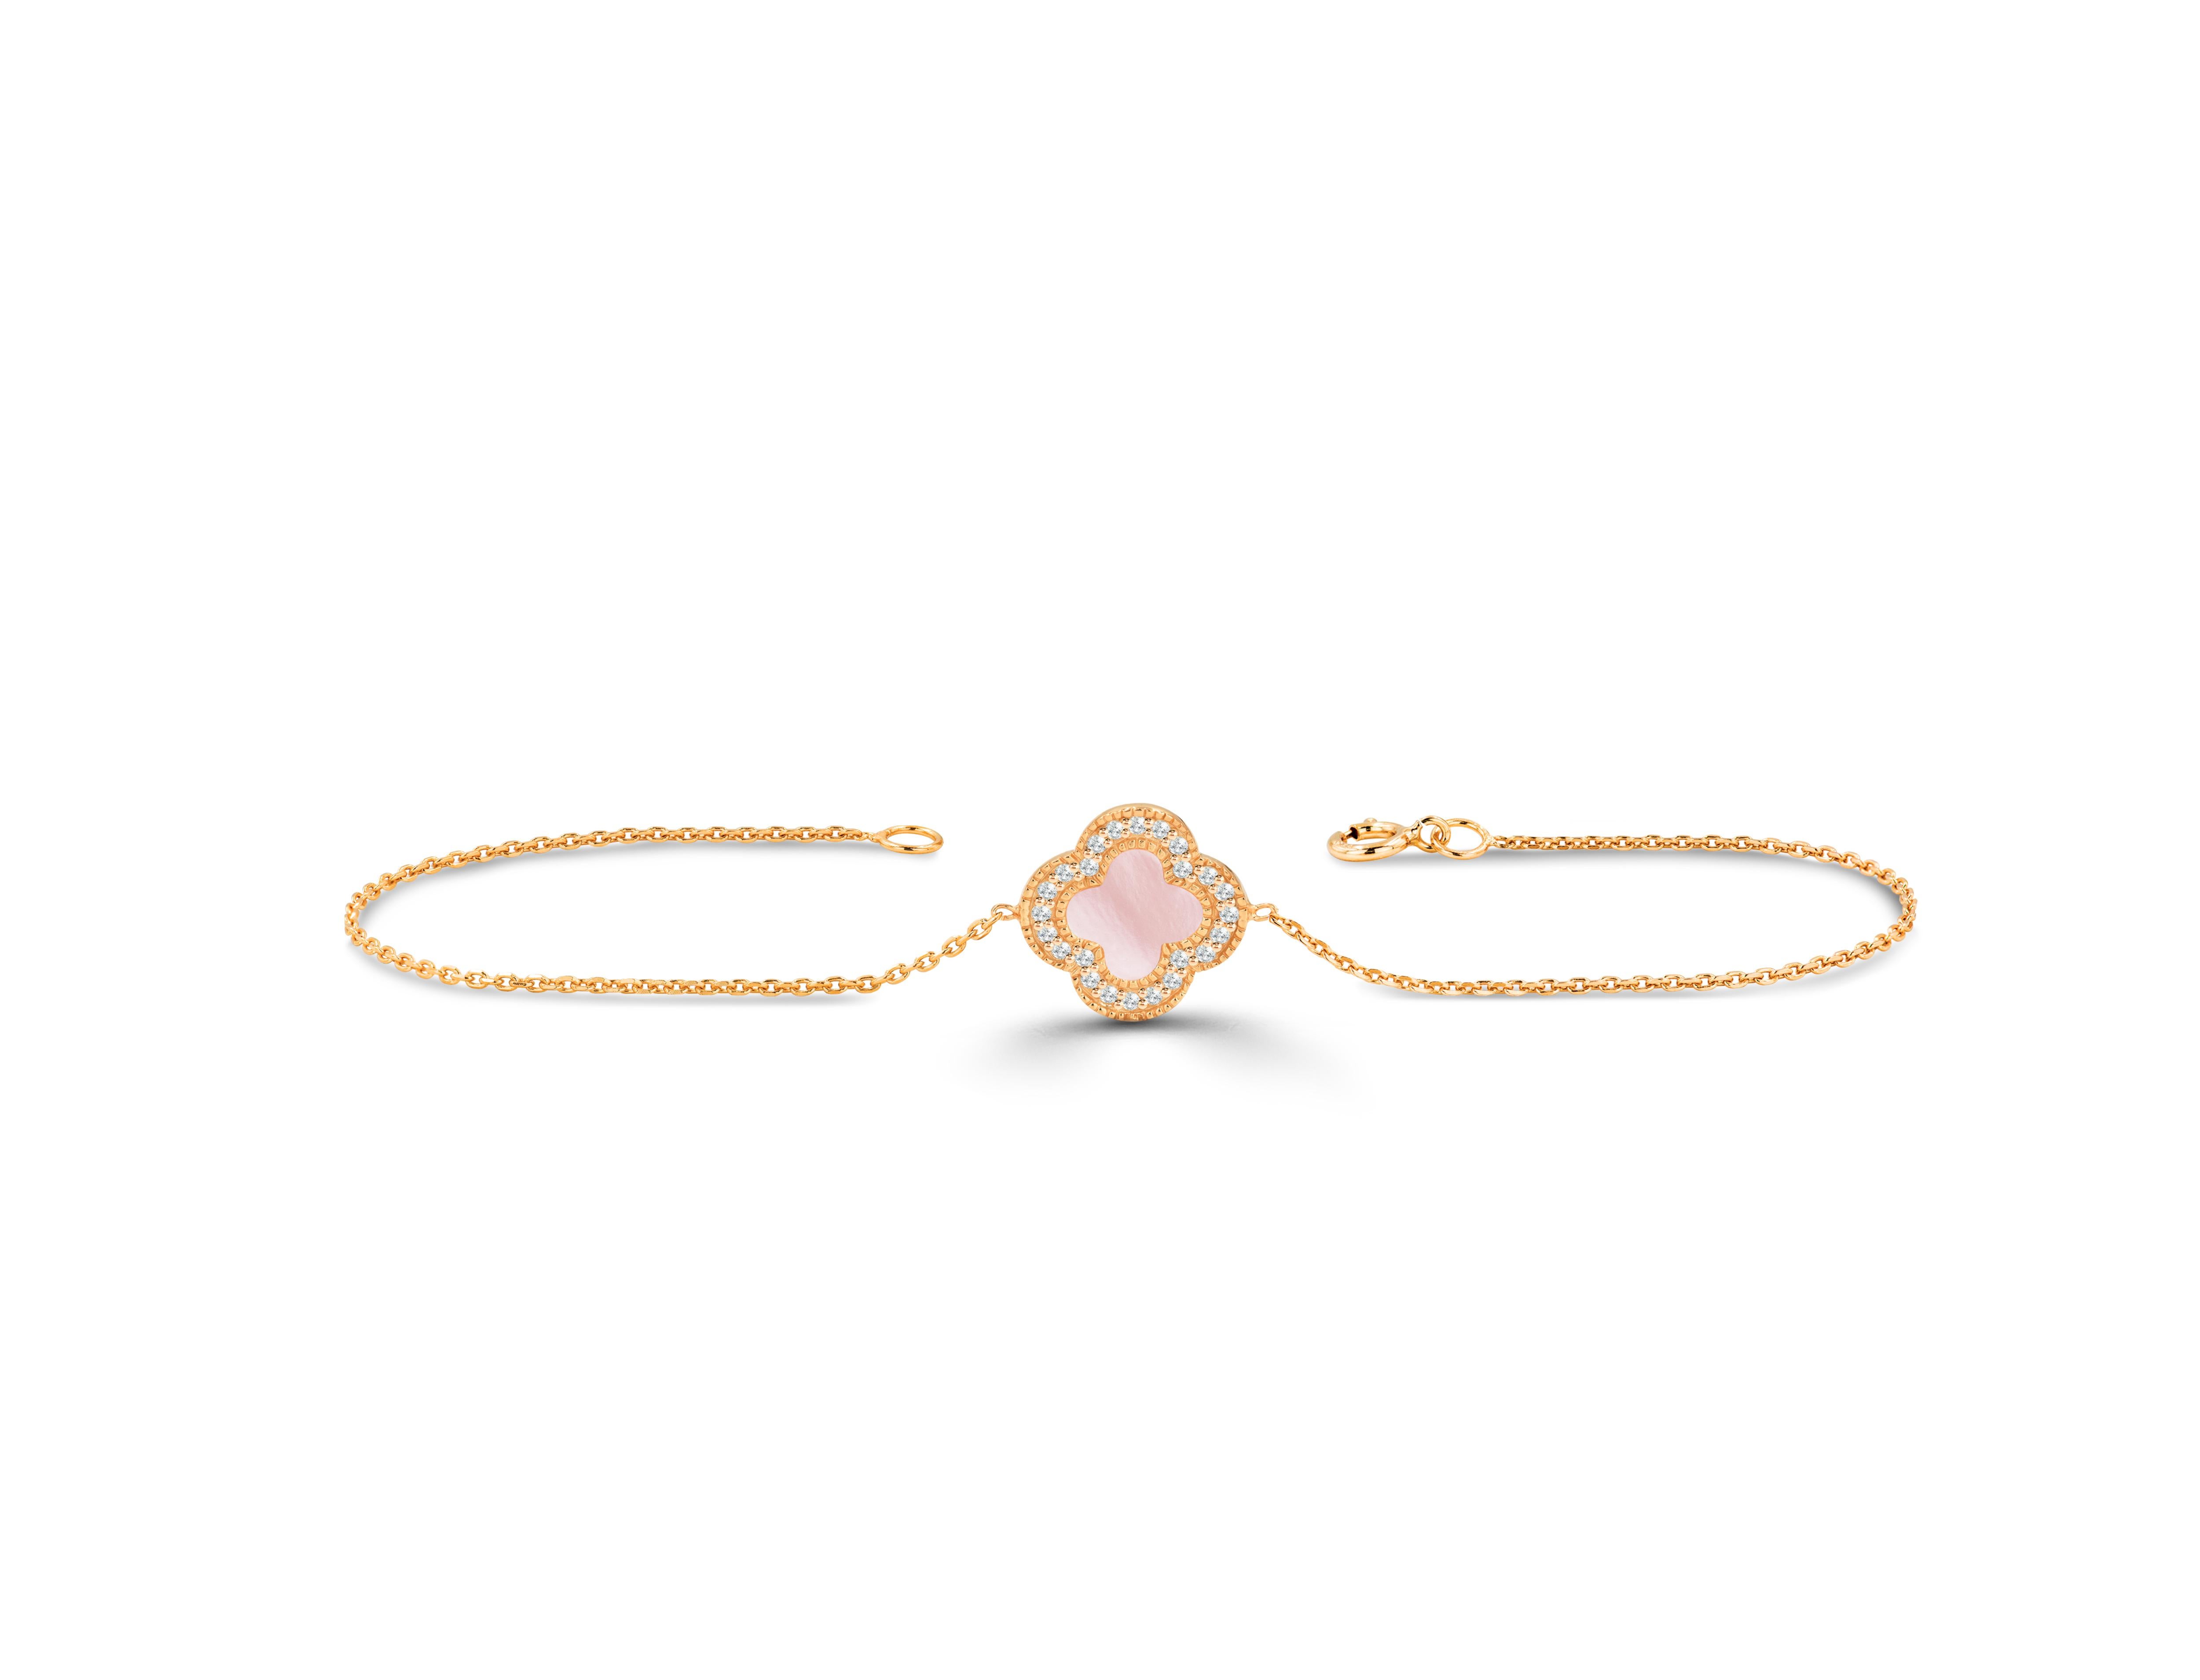 Gold Clover Mother of pearl Bracelet / abalone / Pink MOP / White MOP/ in 10K 14K and 18K Gold. Halo diamond bracelet. Jewelry for her

MOP Bracelet, Tahitian bracelet, Abalone bracelet, White MOP bracelet, Pink MOP Bracelet, Halo diamond bracelet ,